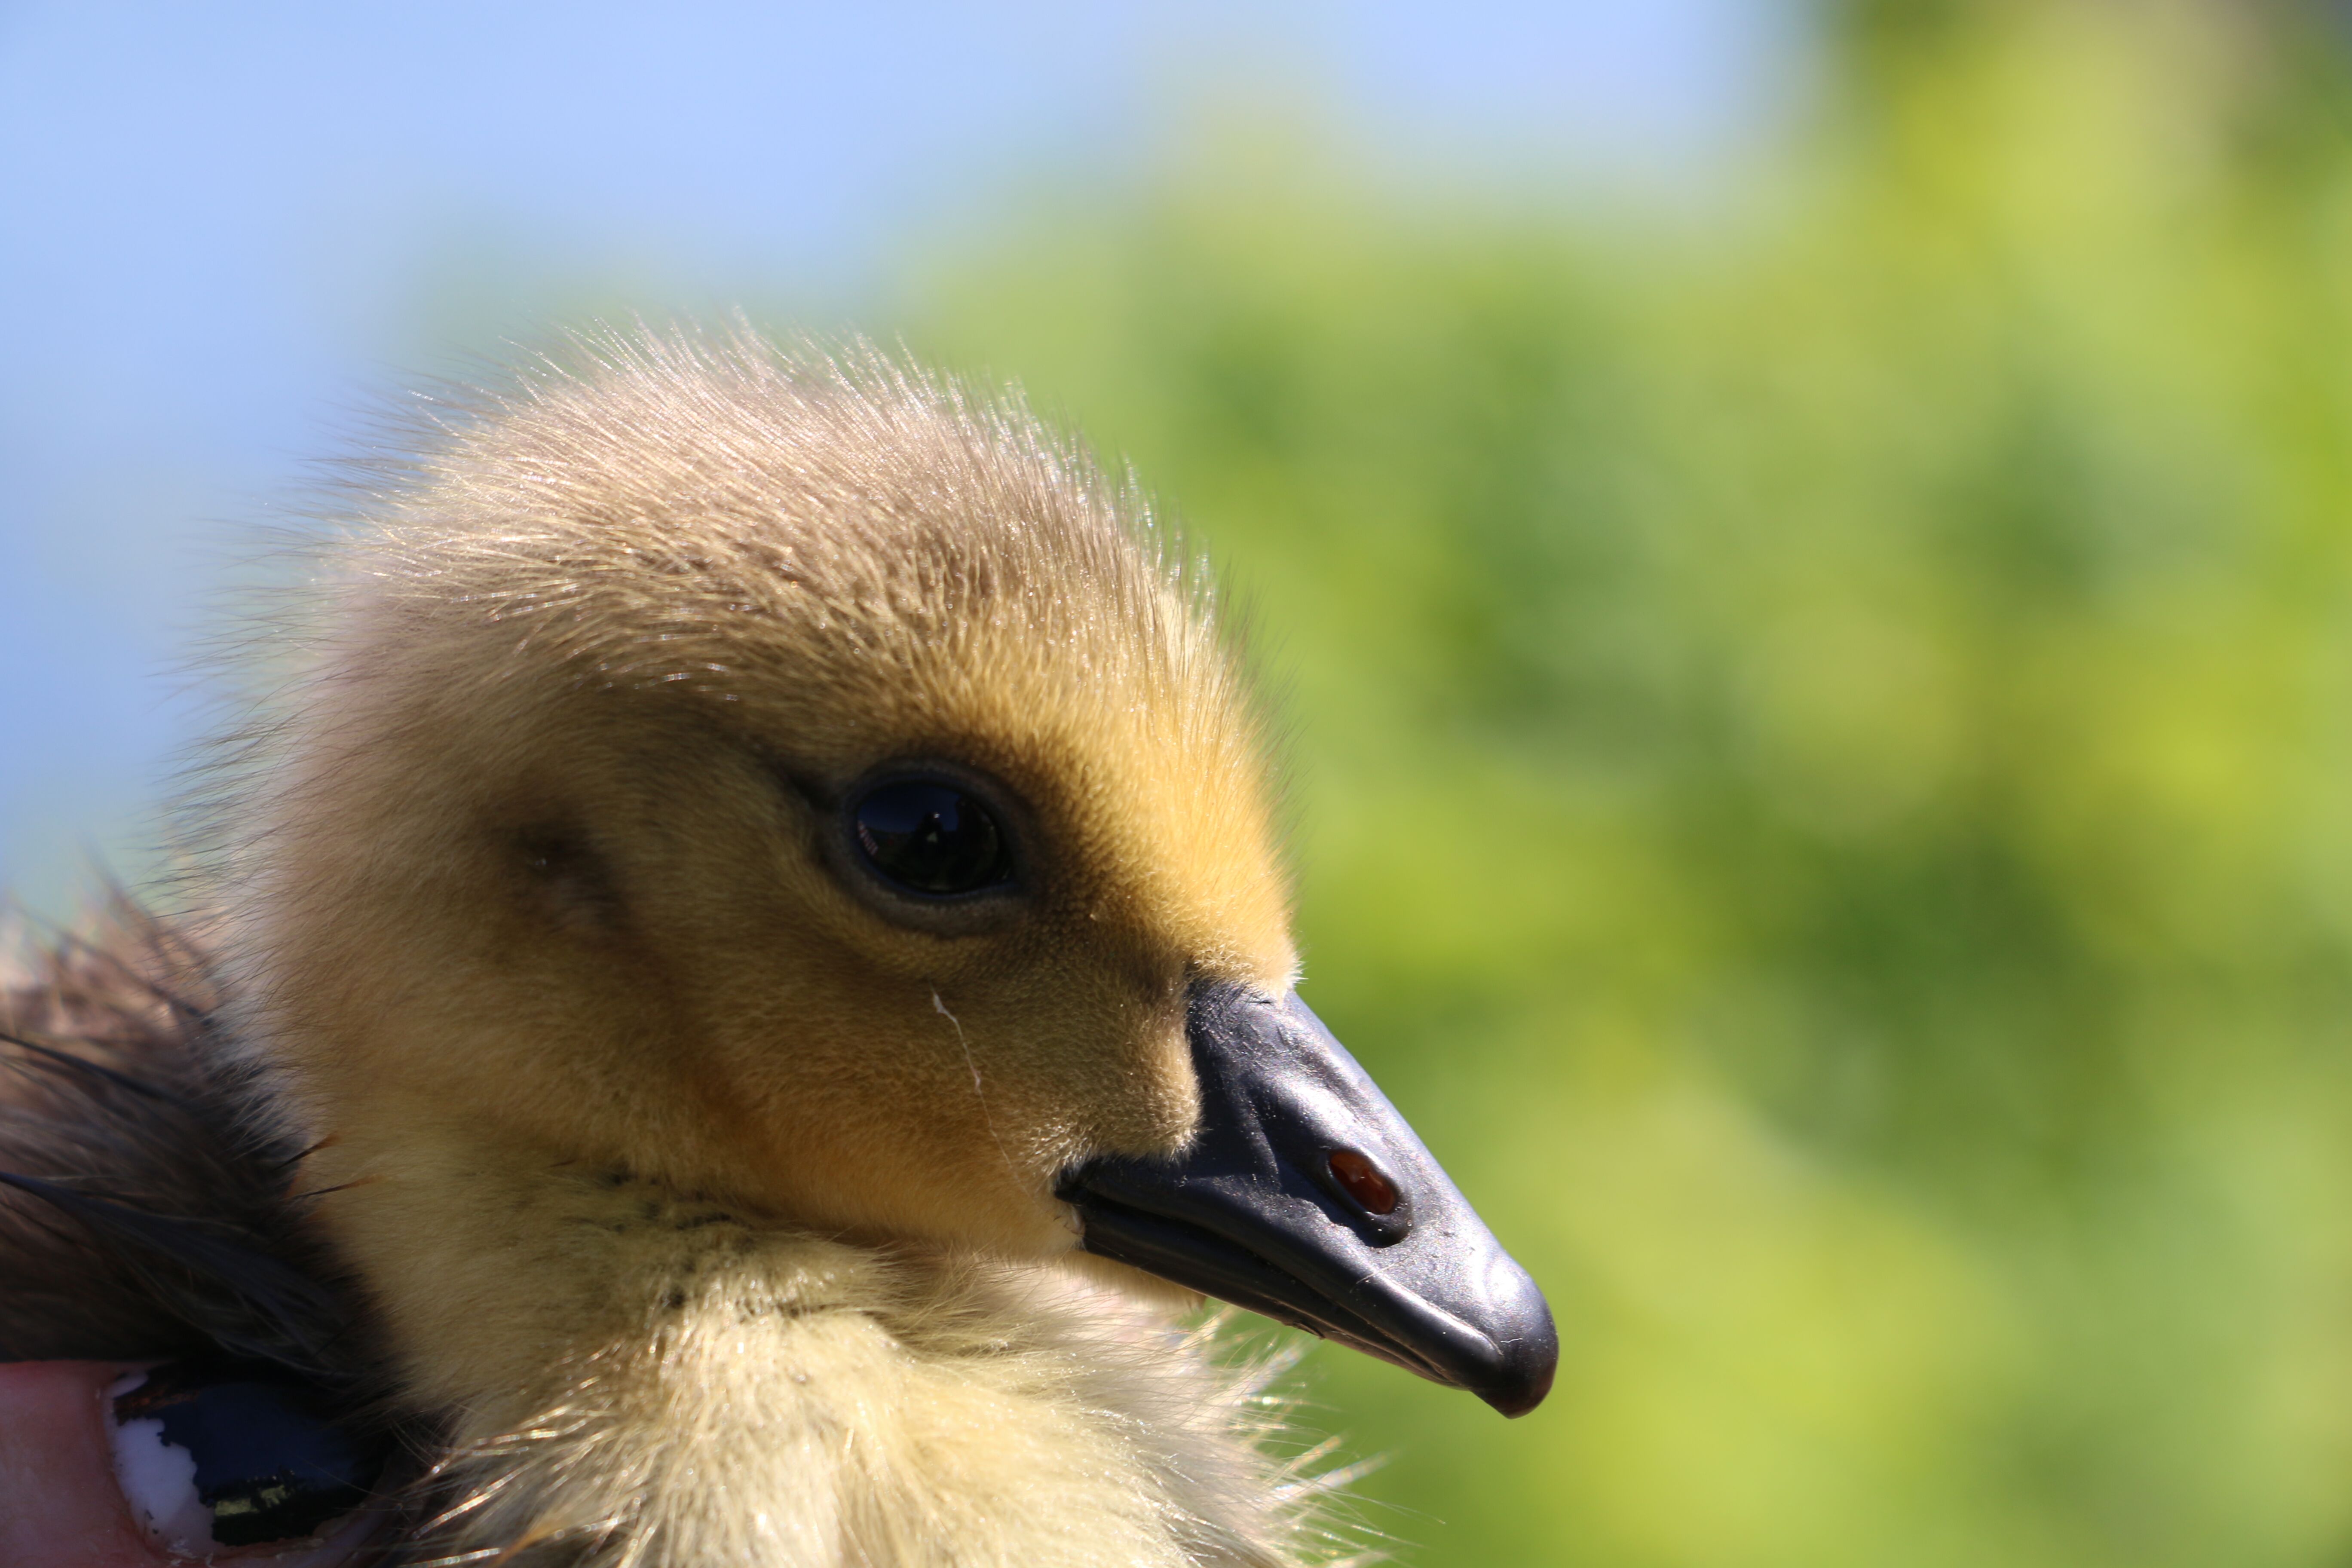 Fluffy gosling posing for a photo before returning to the river.